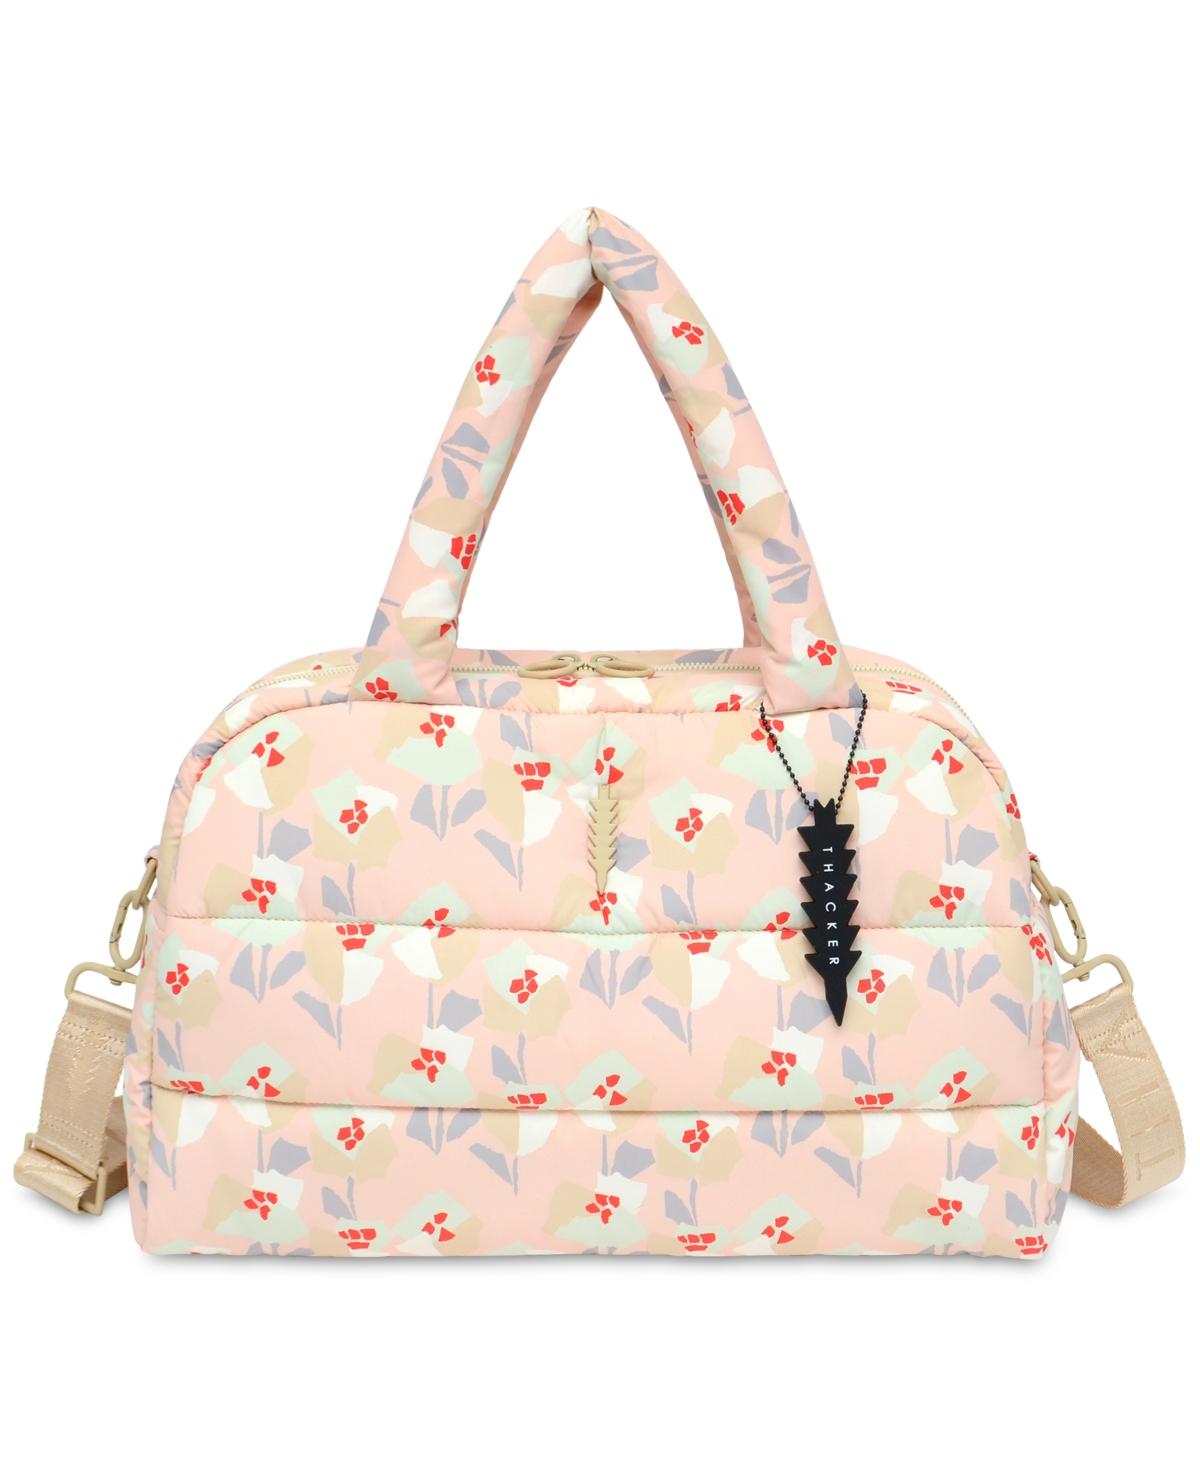 thacker Quinn Puffy Quilted Duffle Bag in Pink